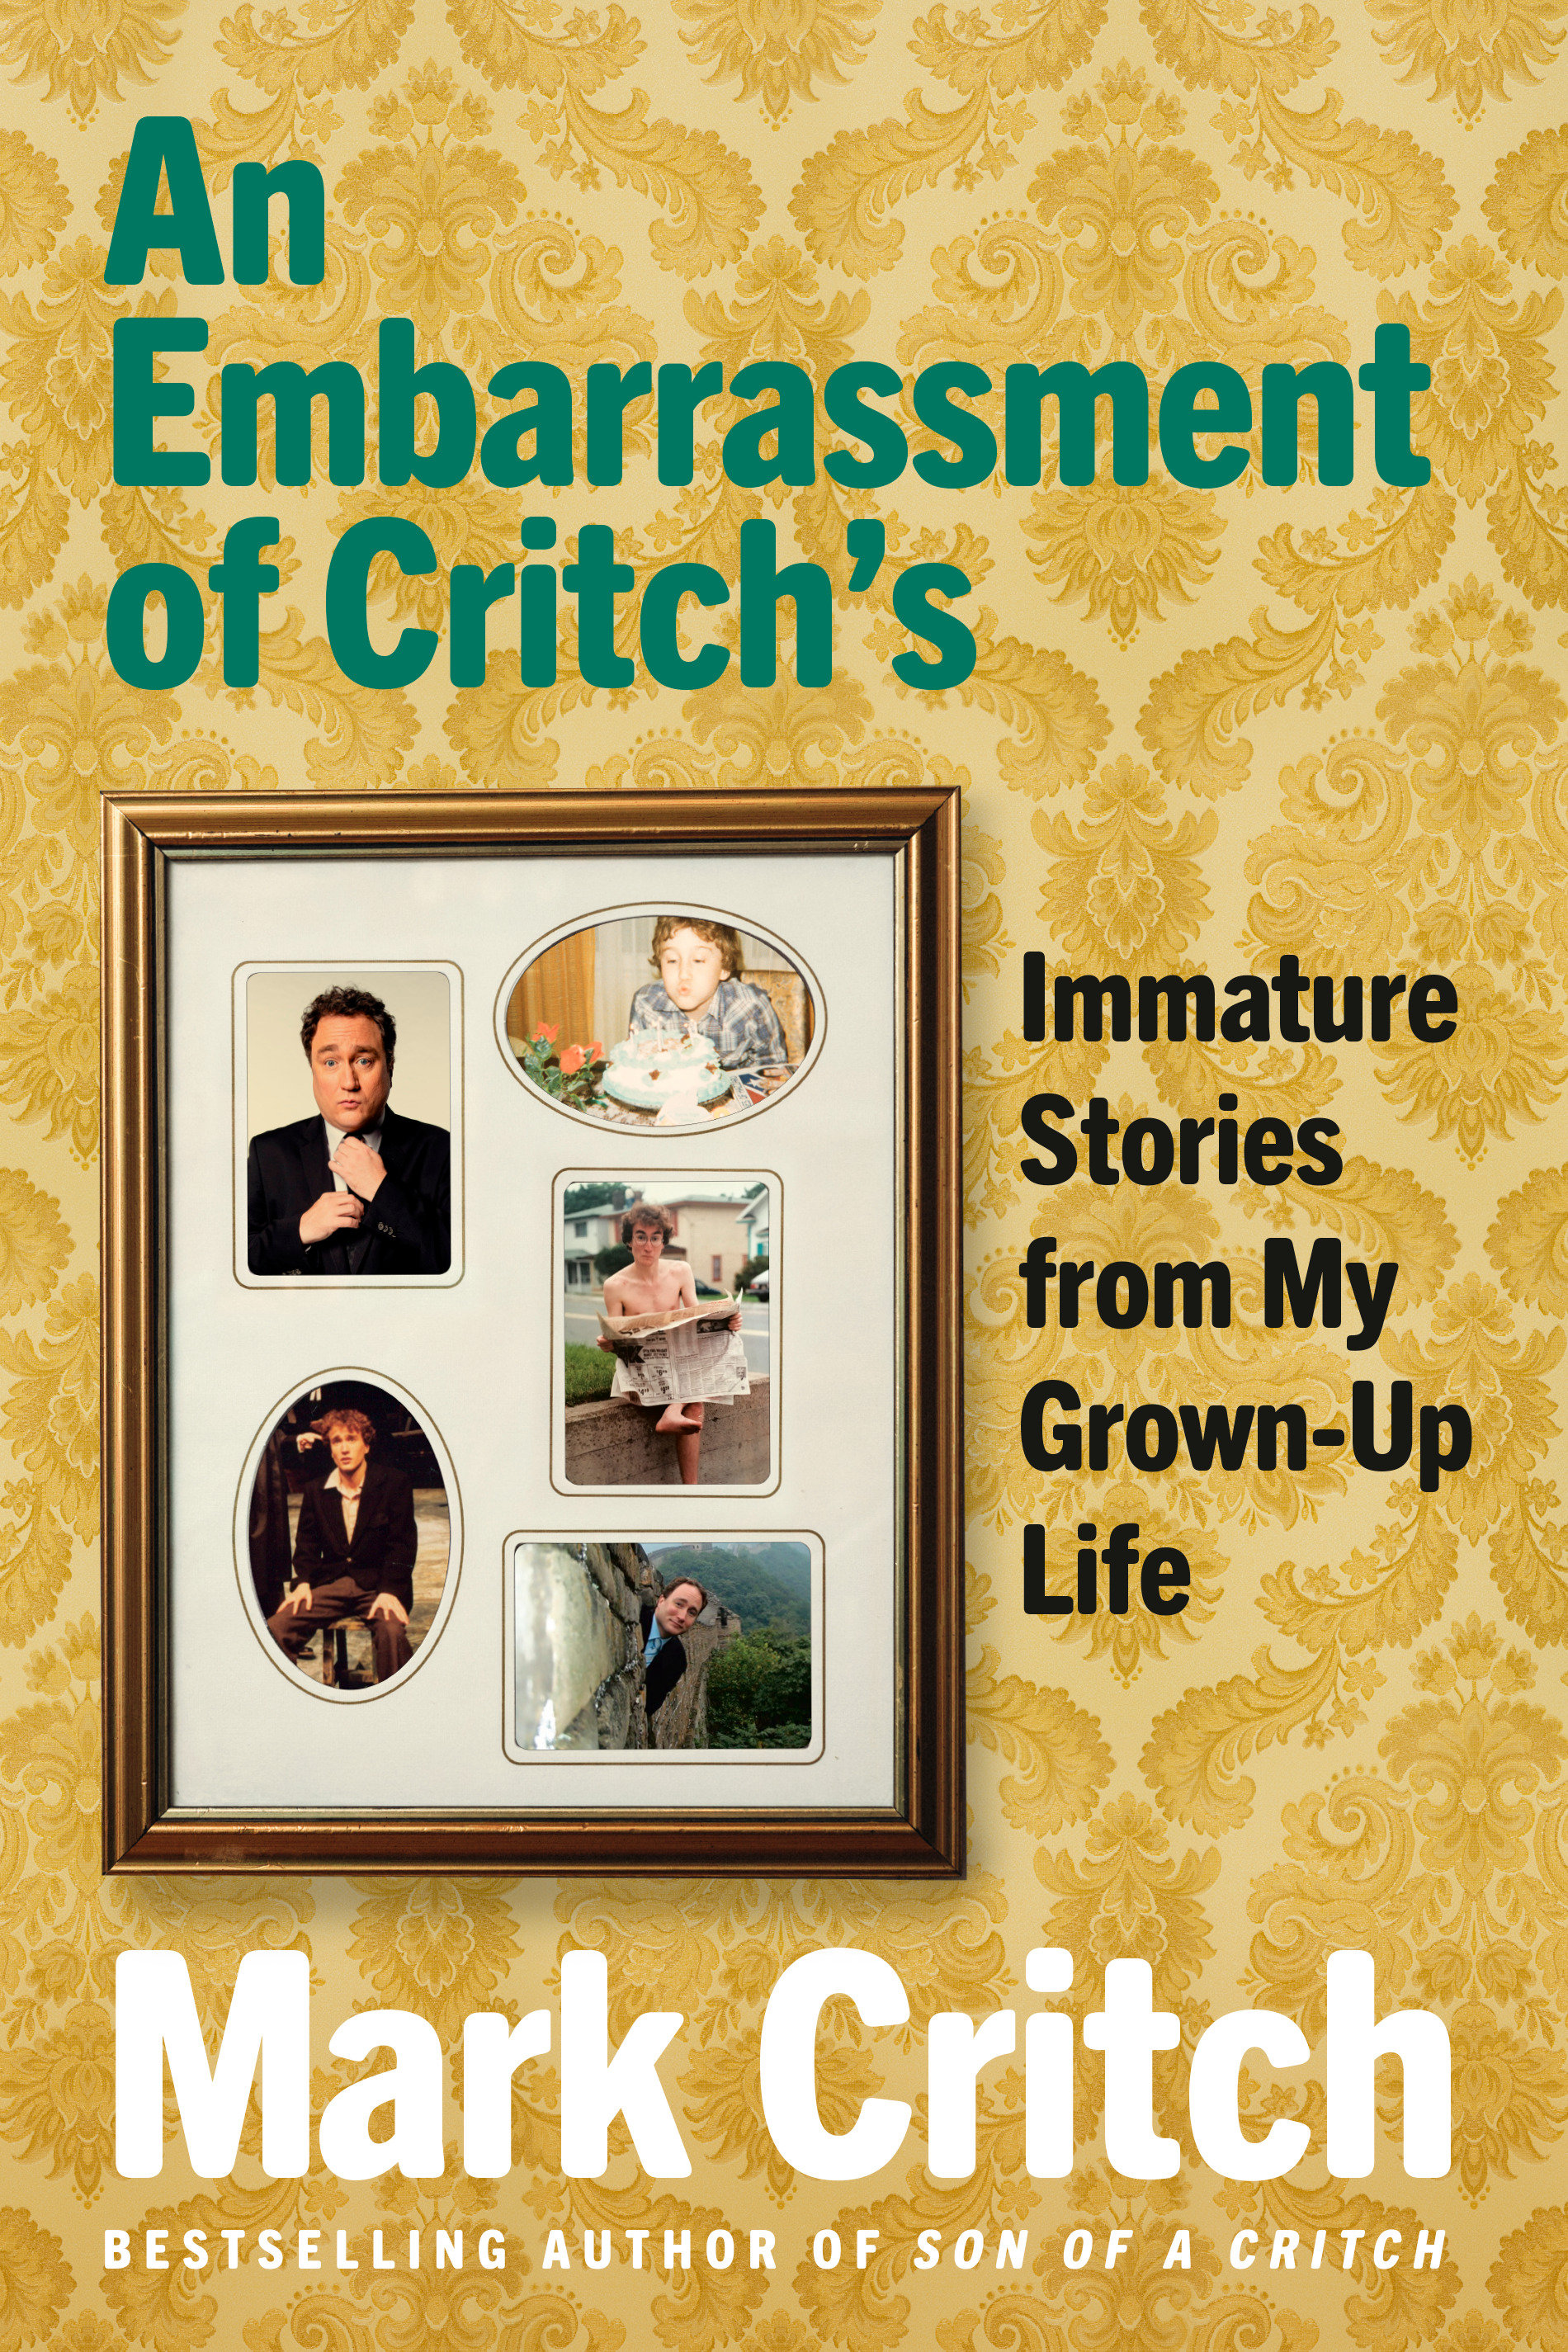 An Embarrassment of Critch’s: Immature Stories From My Grown-Up Life by Mark Critch 